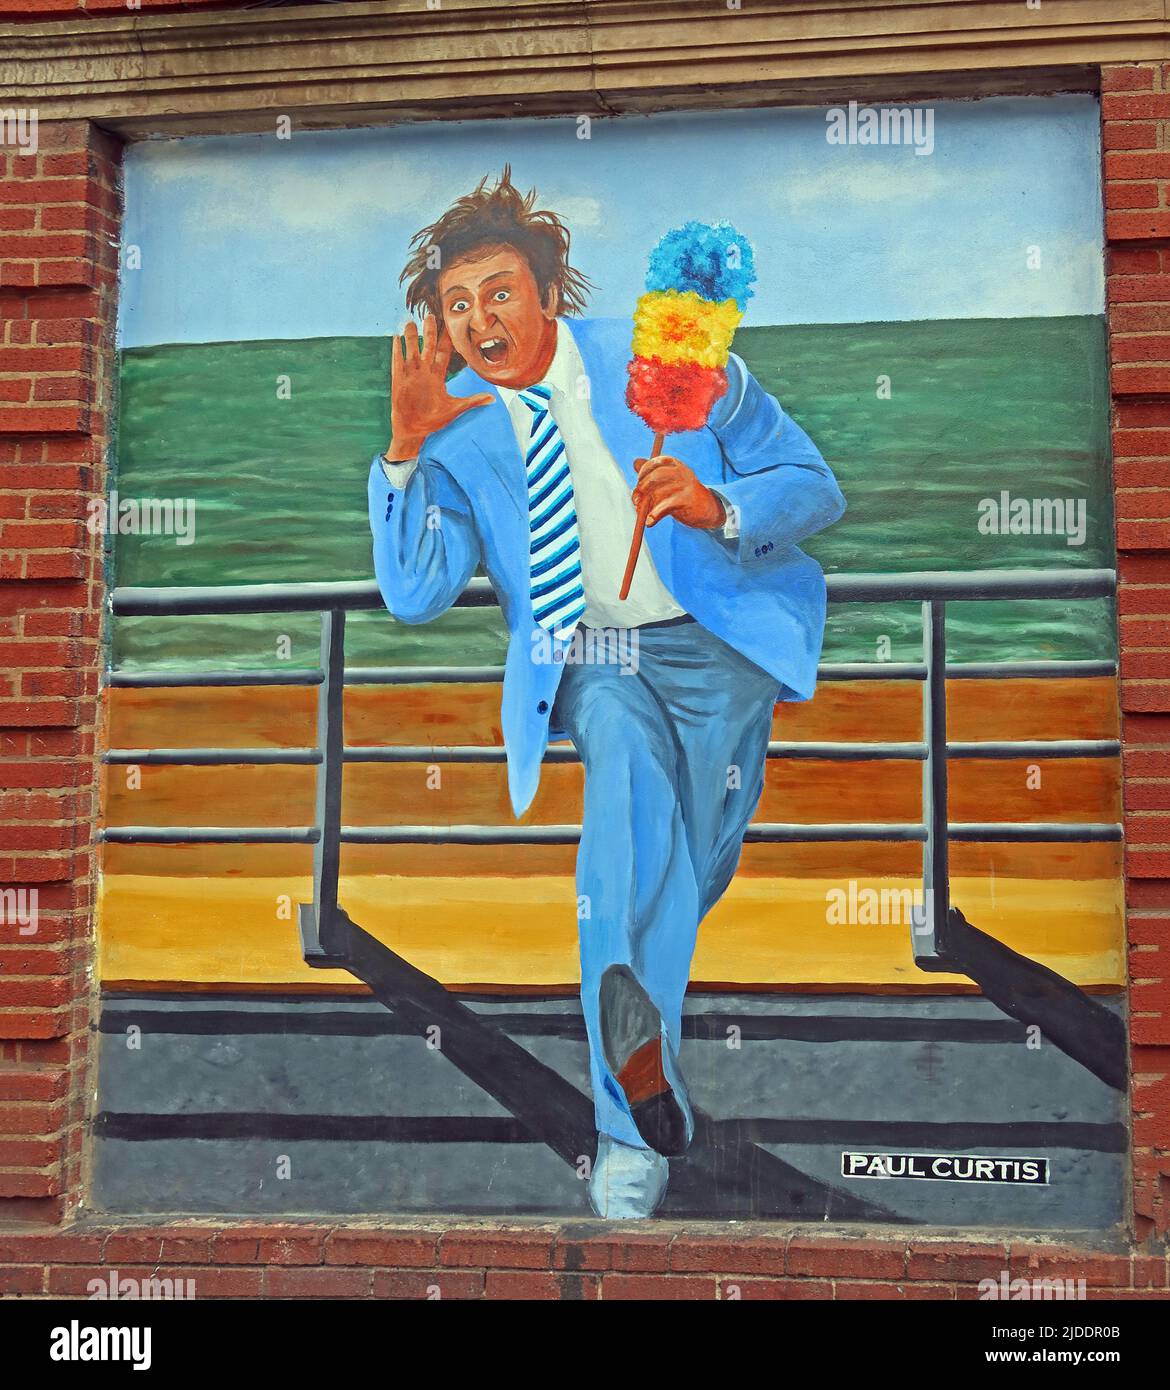 Paul Curtis murals of Ken Dodd Liverpool entertainer, on the Royal Court Theatre, Roe street, L1 Stock Photo